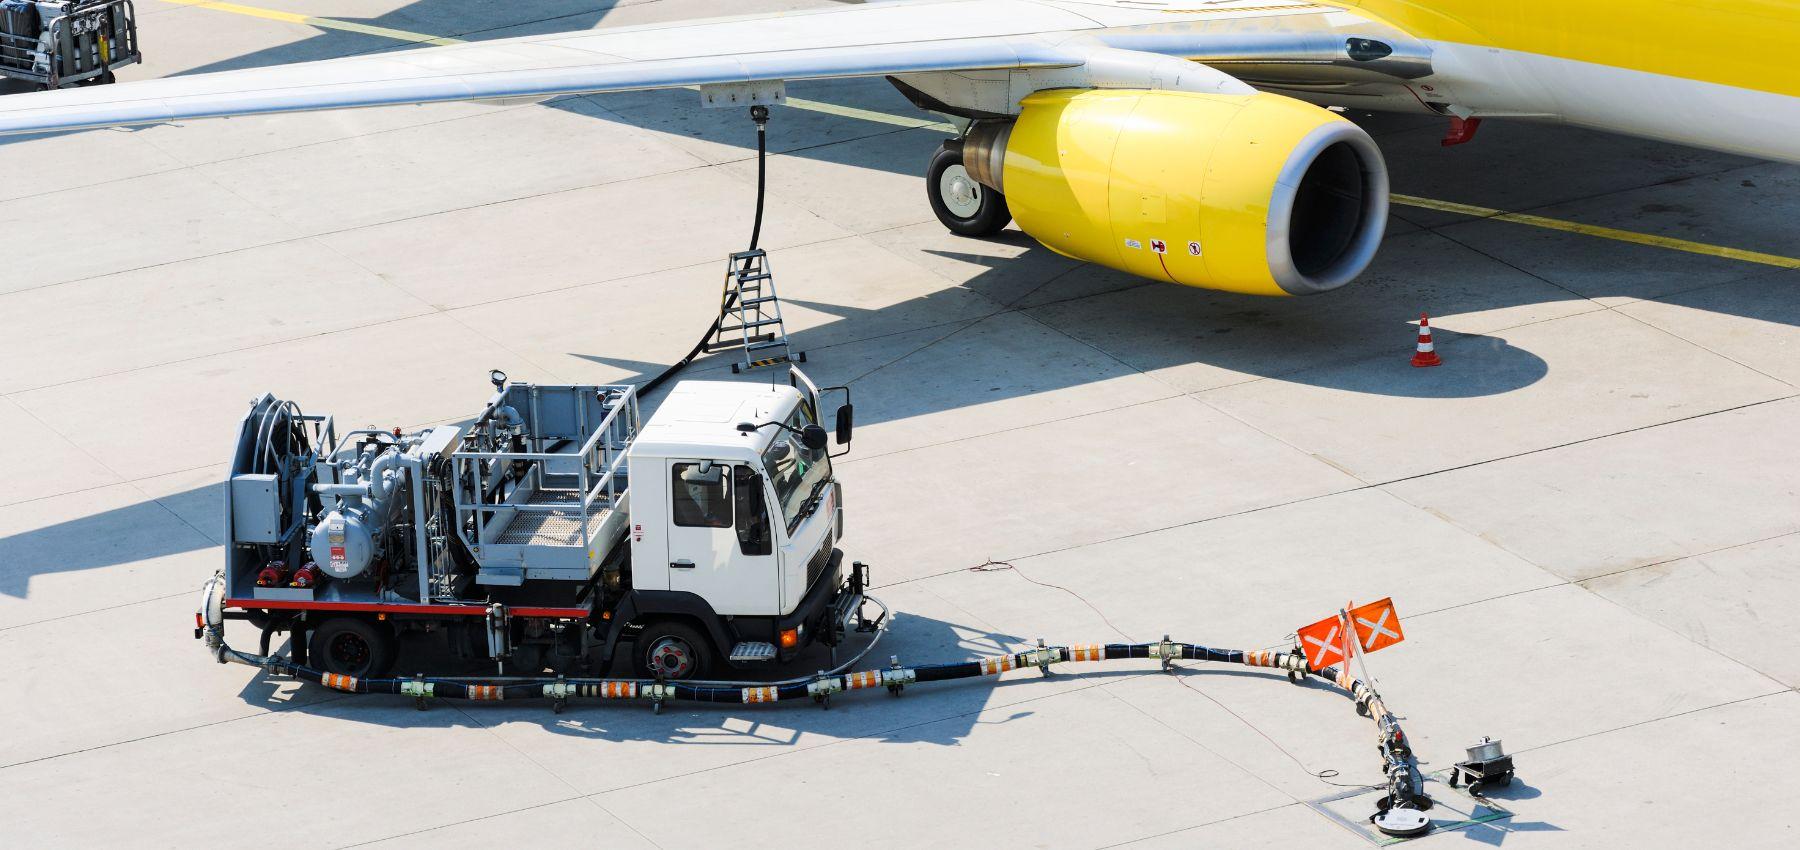 A fuel truck with fuel hose connected to the wing of a passenger jet aircraft.